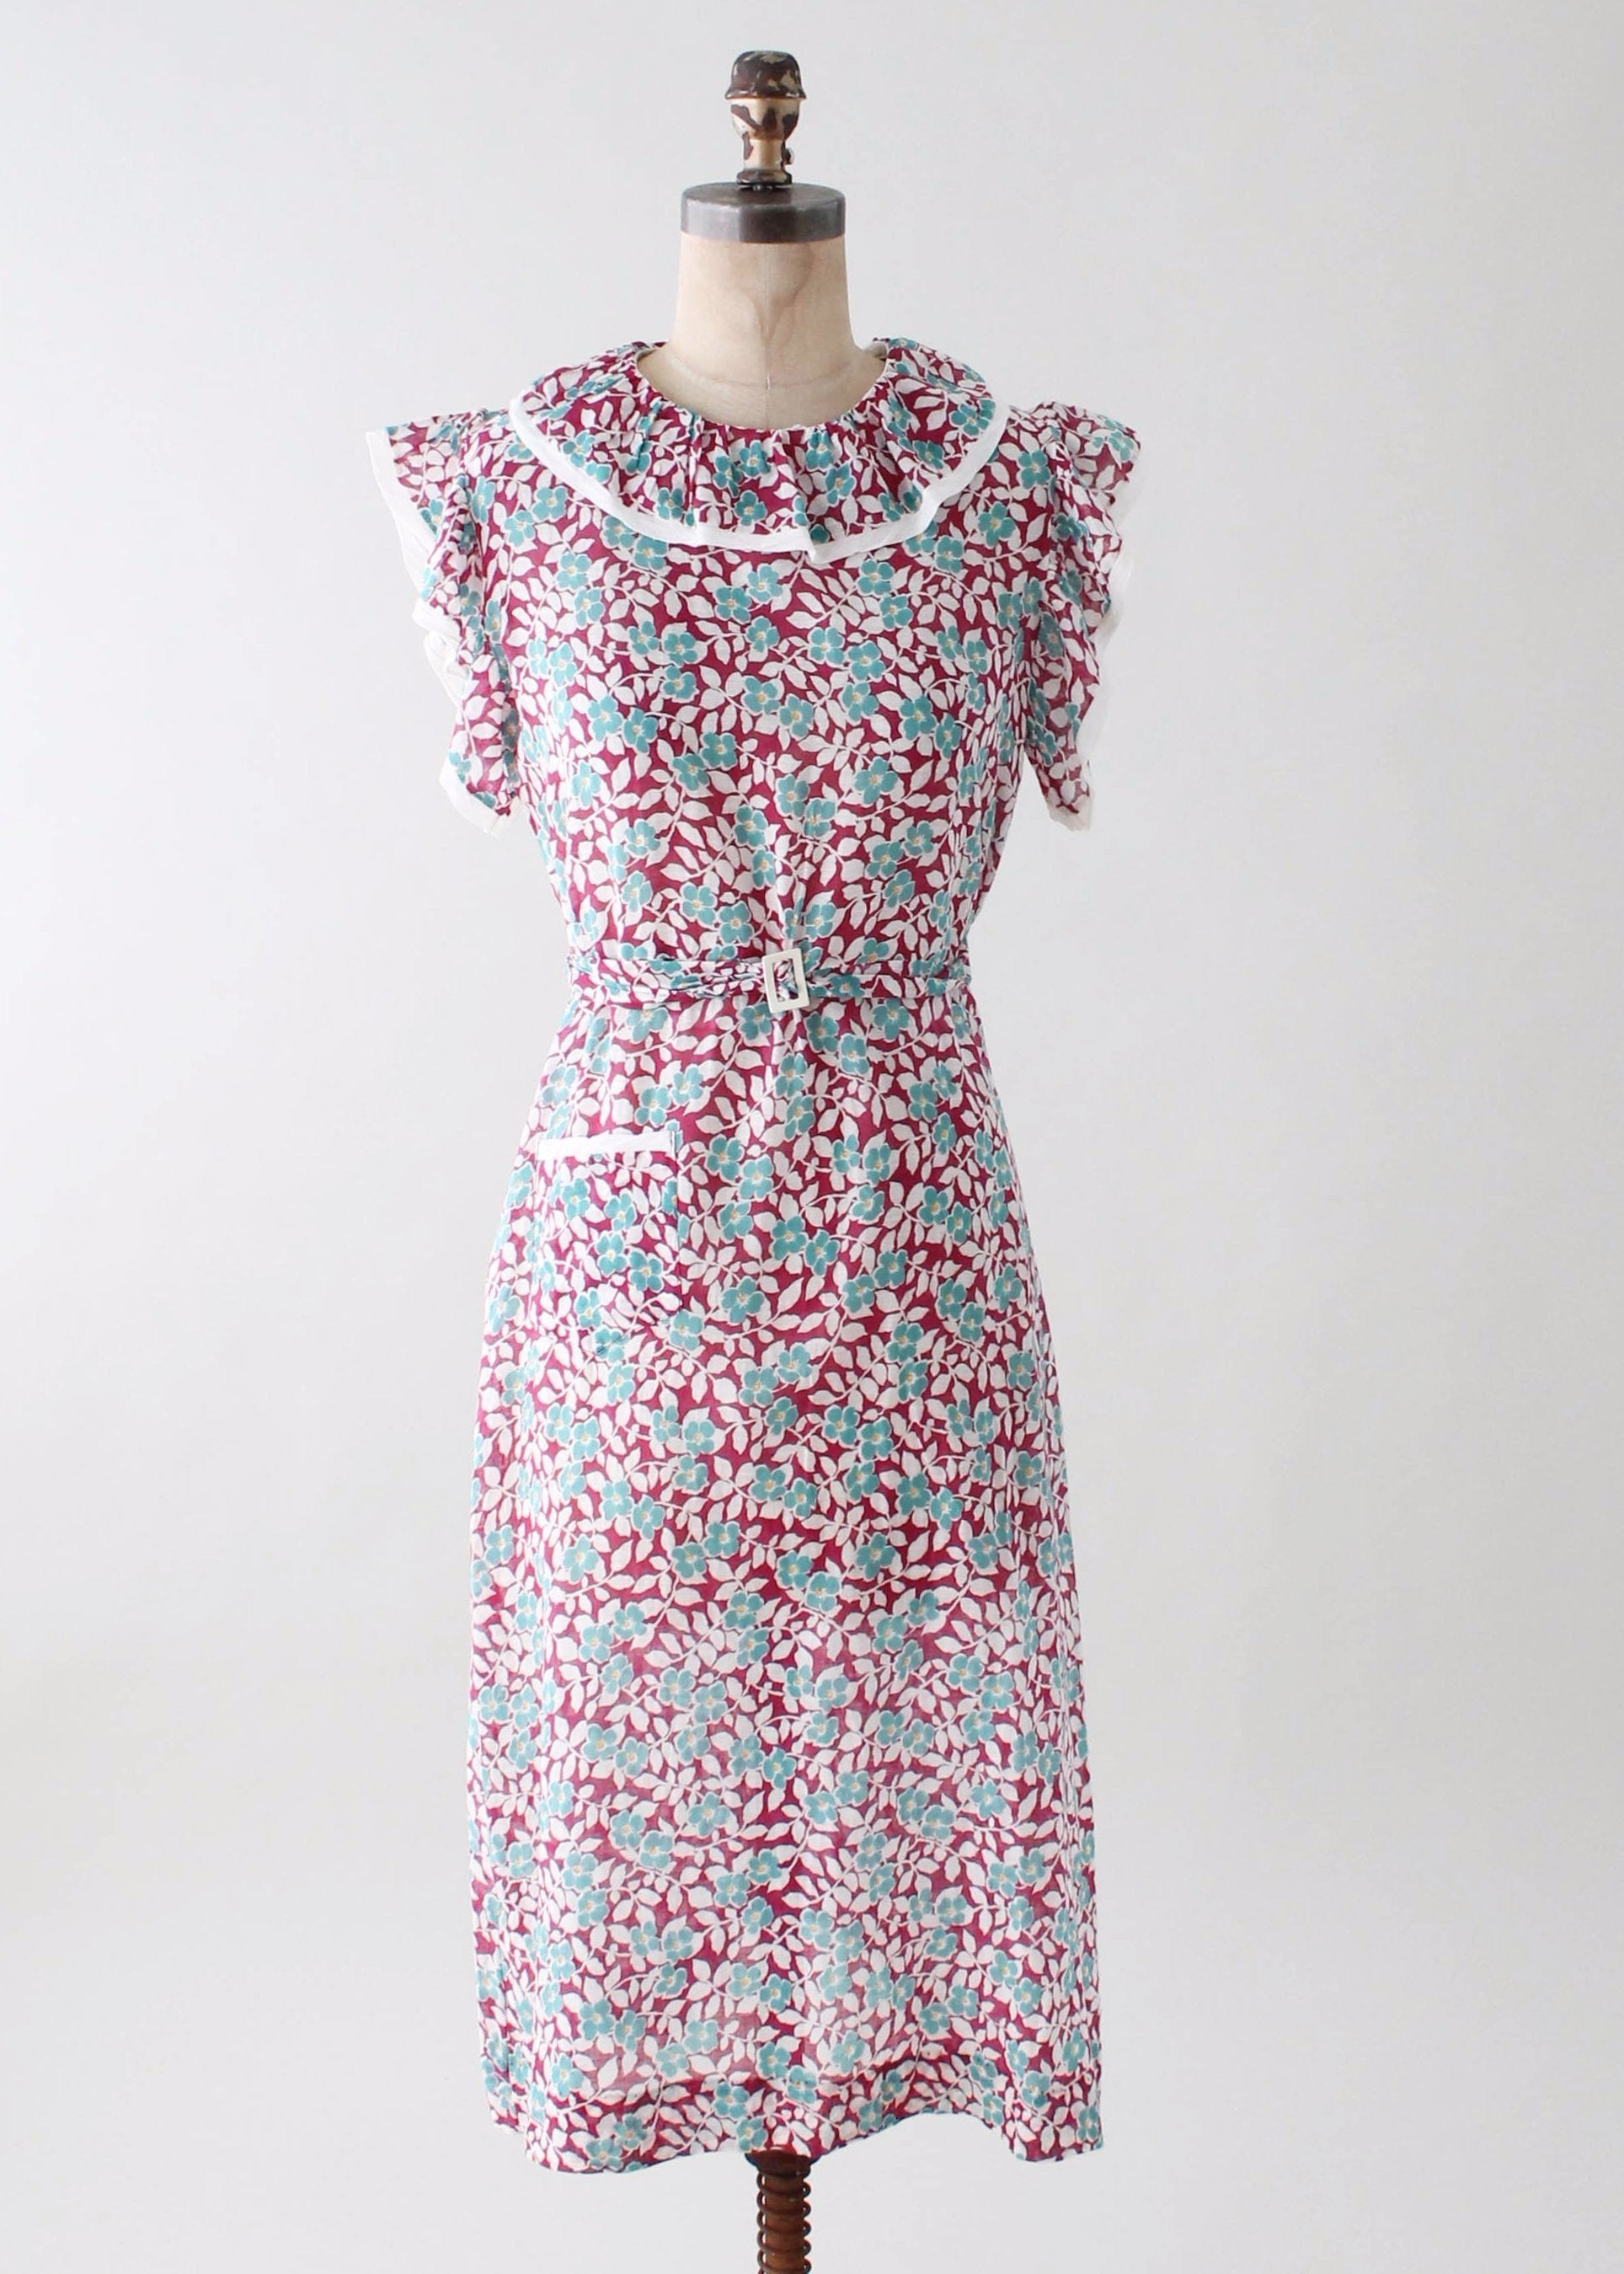 Vintage 1930s Teal and Plum Floral Day Dress - Raleigh Vintage